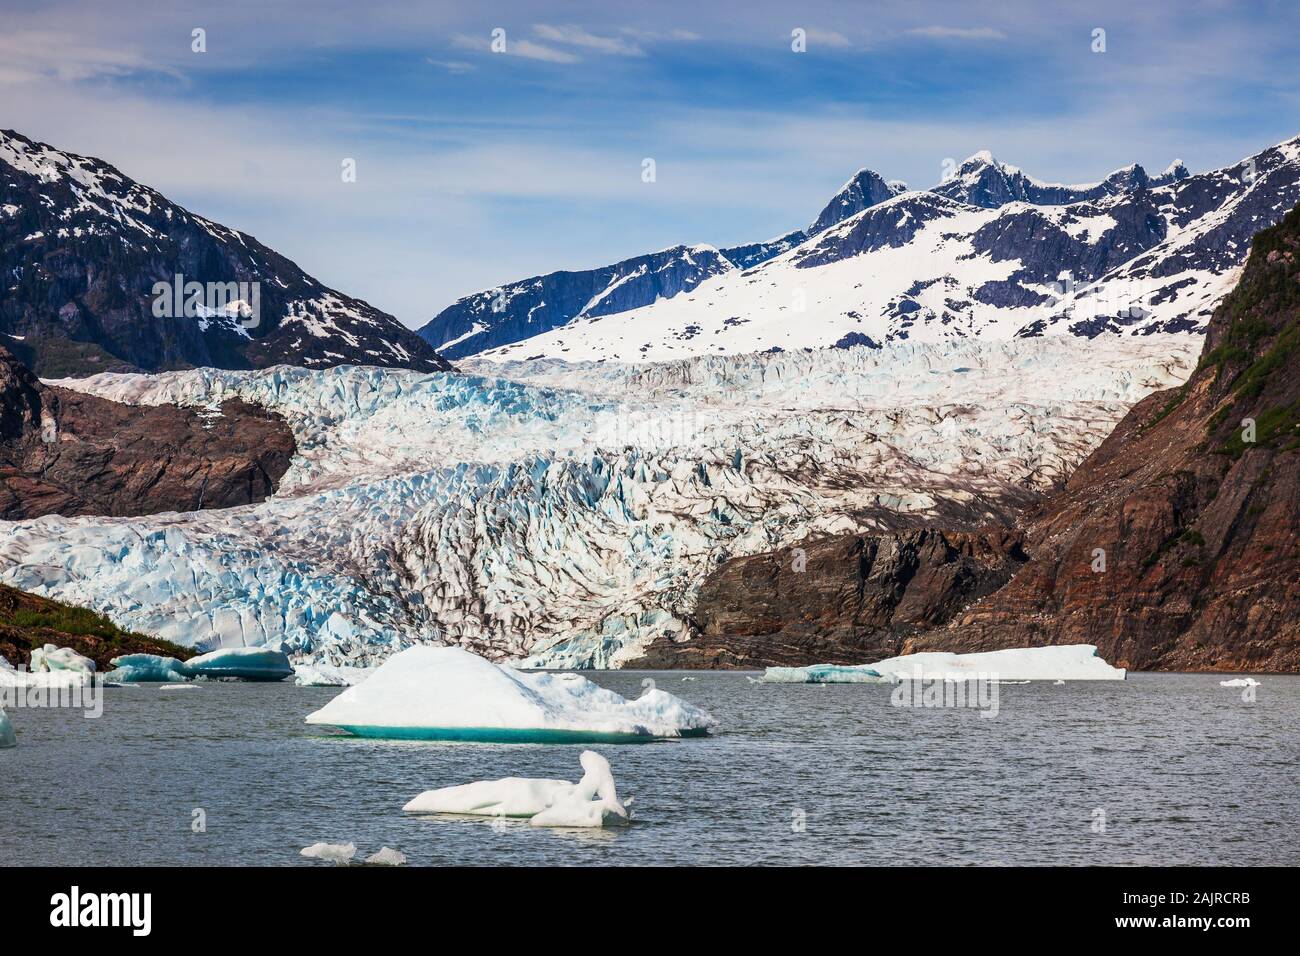 Juneau, Alaska. Mendenhall Glacier Viewpoint with icebergs in the lake. Stock Photo